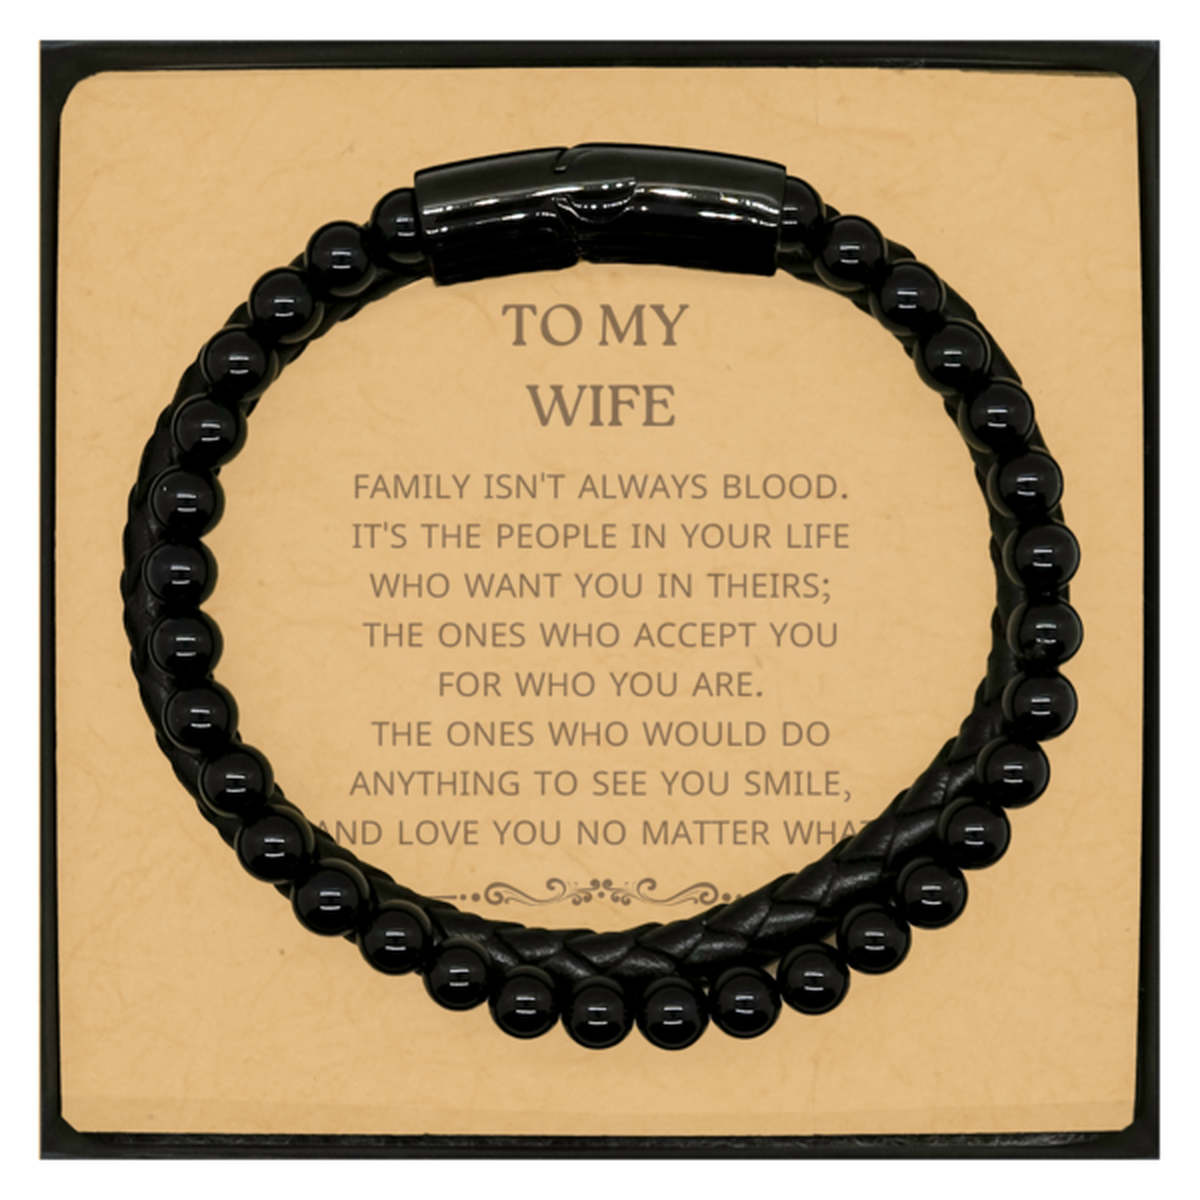 To My Wife Gifts, Family isn't always blood, Wife Stone Leather Bracelets, Birthday Christmas Unique Present For Wife